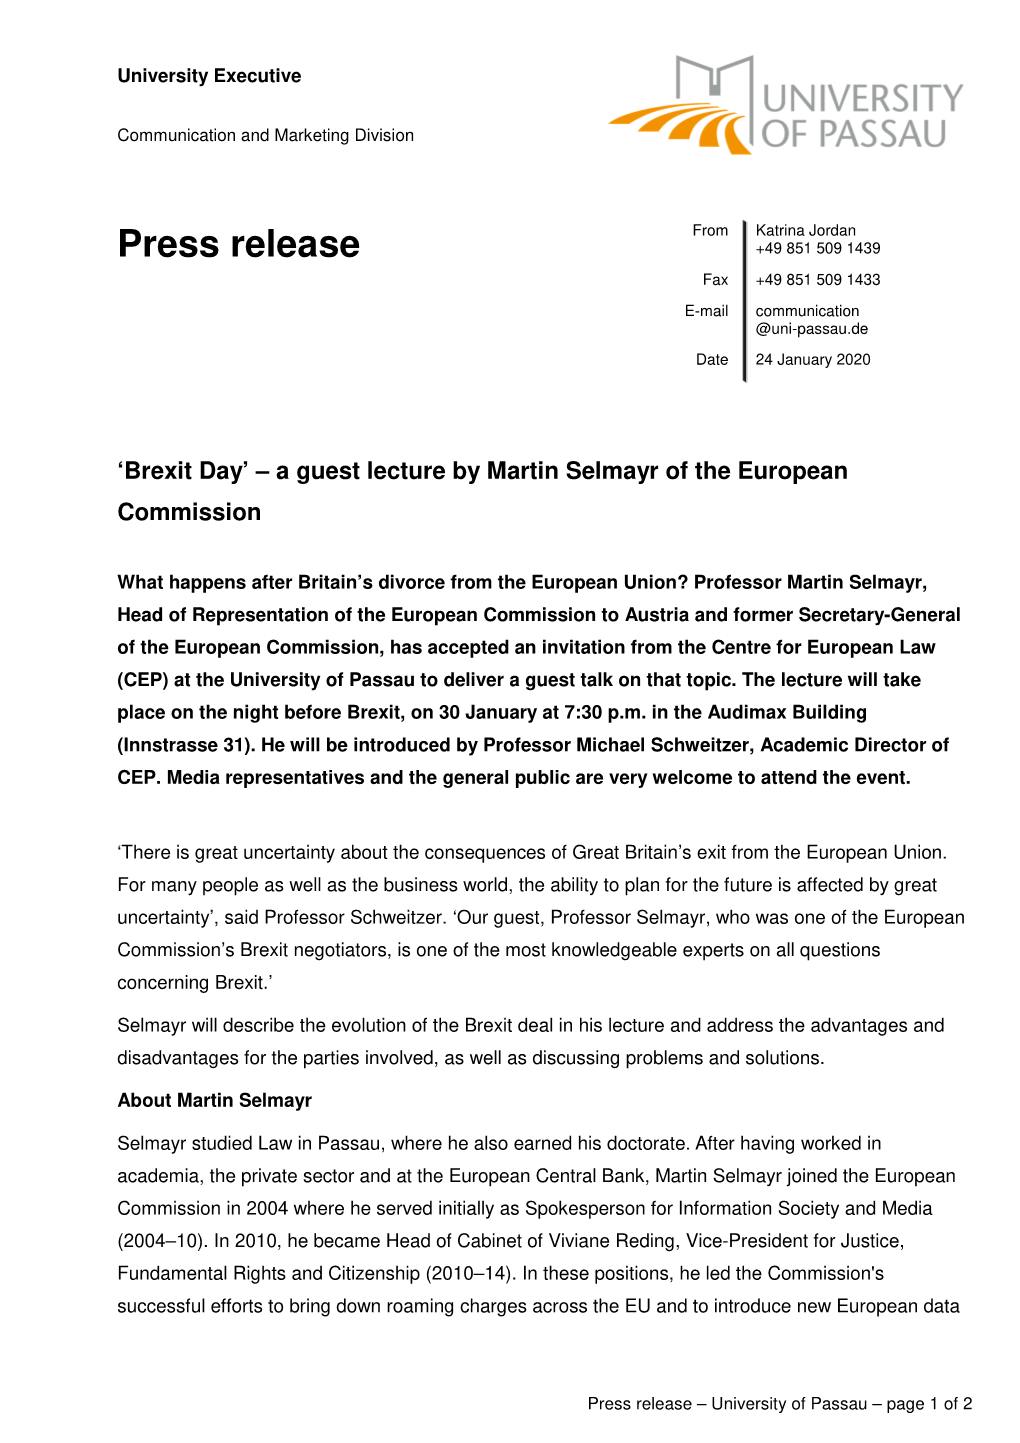 'Brexit Day' – a Guest Lecture by Martin Selmayr of the European Commission